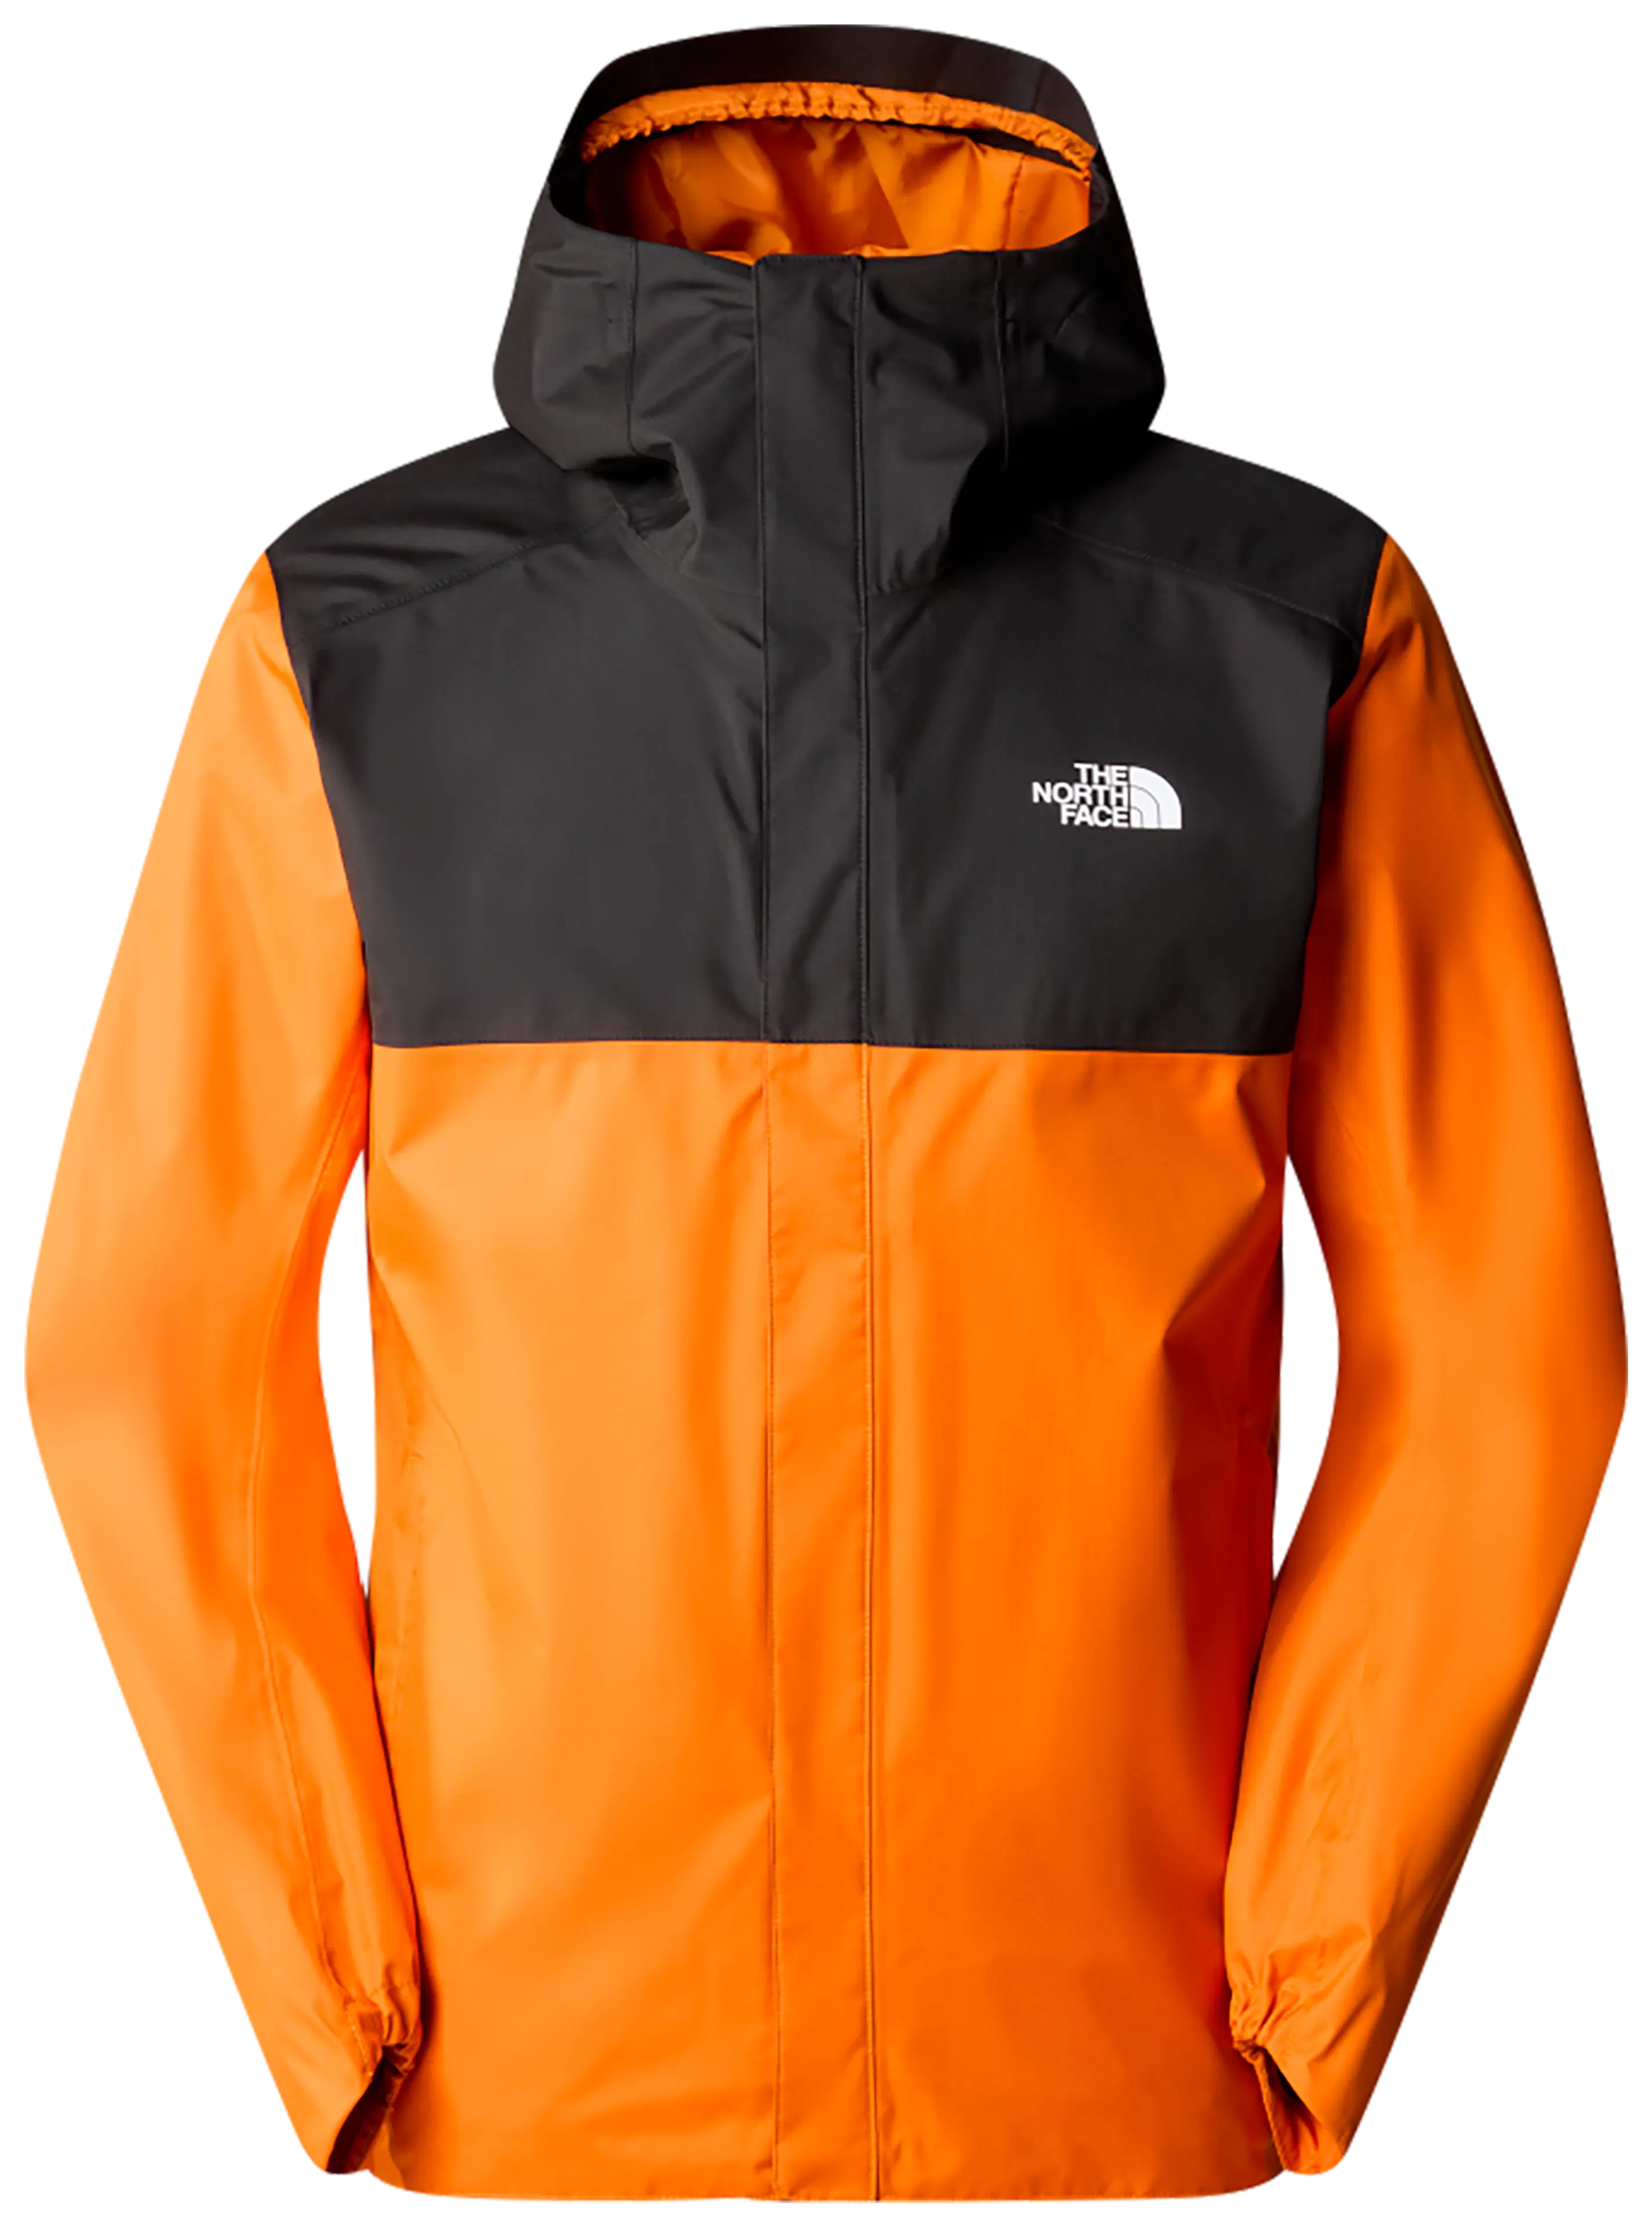 The North Face quest zip-in takki